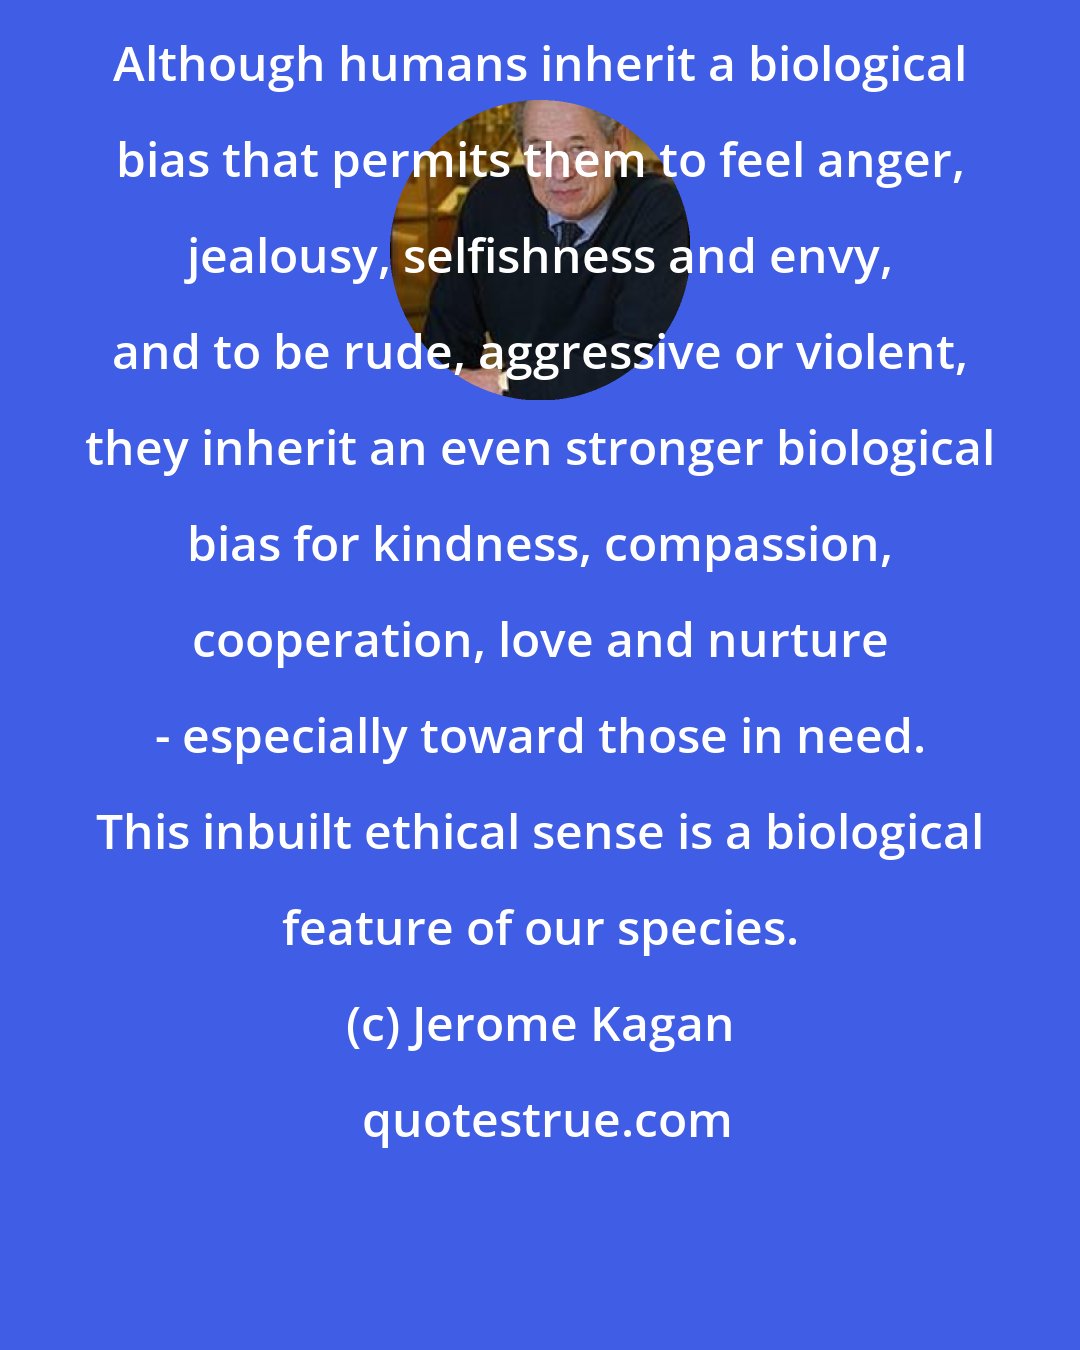 Jerome Kagan: Although humans inherit a biological bias that permits them to feel anger, jealousy, selfishness and envy, and to be rude, aggressive or violent, they inherit an even stronger biological bias for kindness, compassion, cooperation, love and nurture - especially toward those in need. This inbuilt ethical sense is a biological feature of our species.